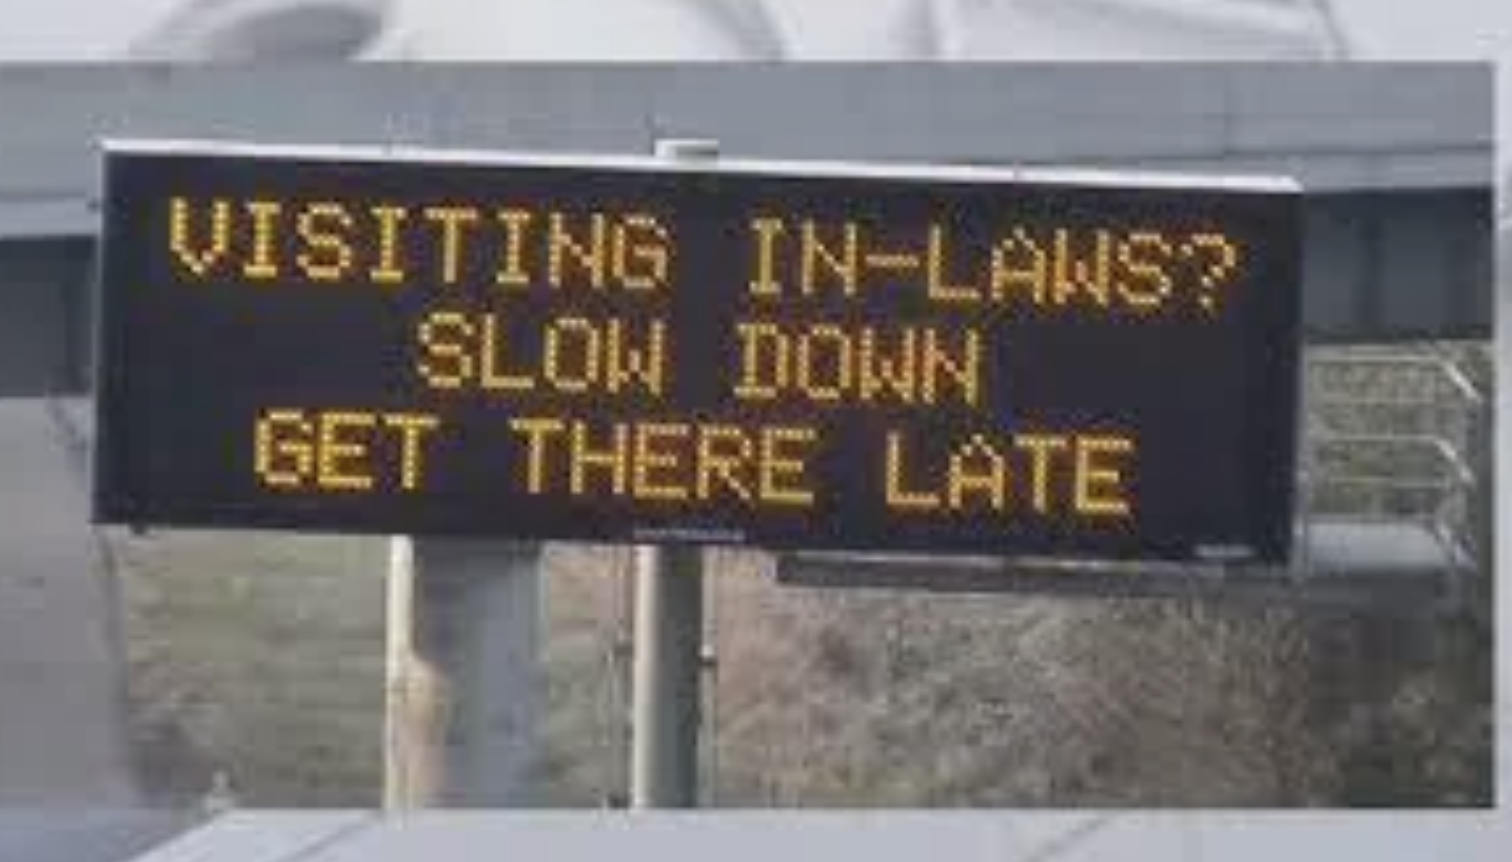 Electronic road sign with humorous message advising drivers to slow down if visiting in-laws, implying to delay arrival